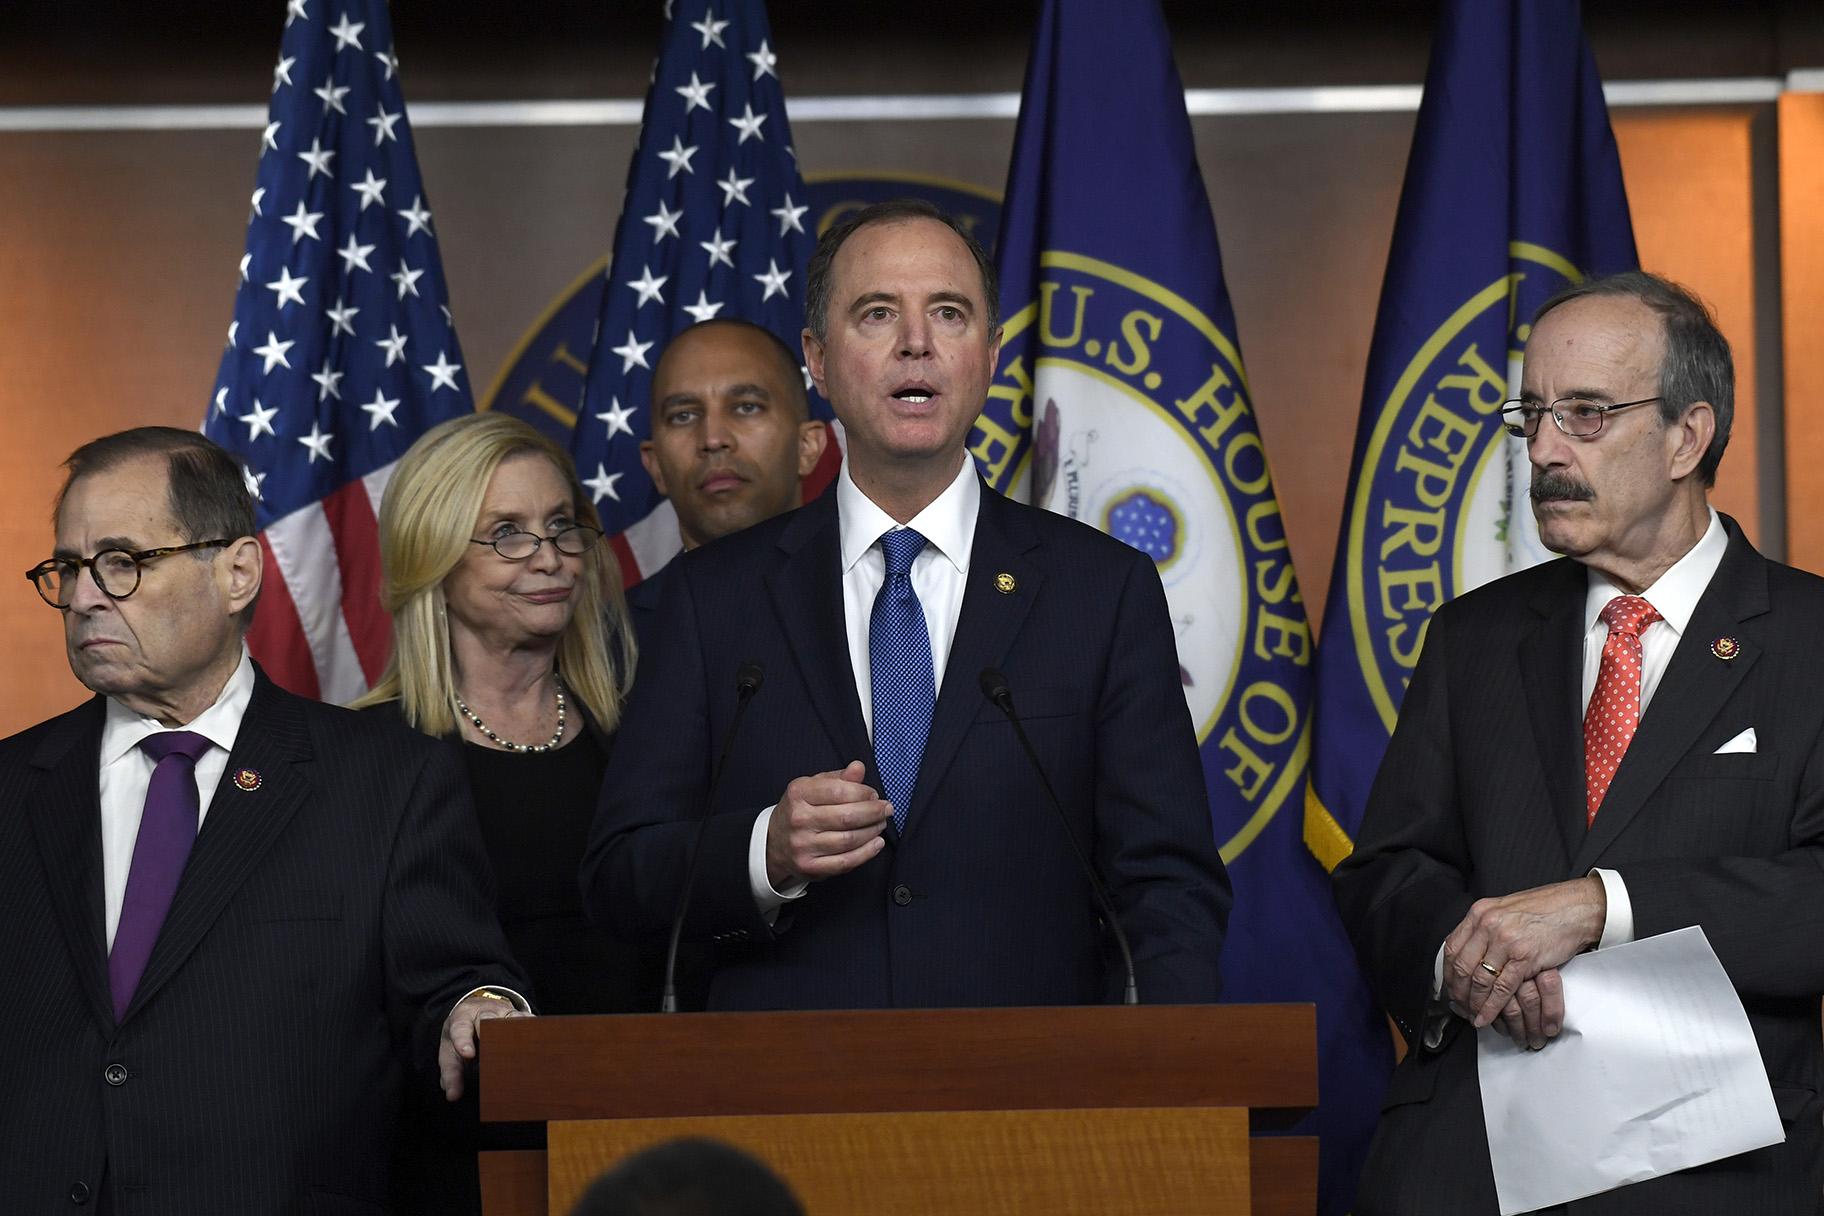 House Intelligence Committee Chairman Adam Schiff, D-Calif., second from right, speaks during a news conference on Capitol Hill in Washington, Thursday, Oct. 31, 2019. Schiff is joined by, from left, House Judiciary Committee Chairman Jerrold Nadler, D-N.Y., House Oversight and Government Reform Committee acting chair Carolyn Maloney, D-N.Y., House Democratic Caucus Chairman Hakeem Jeffries, D-N.Y., and House Foreign Affairs Committee Chairman Eliot Engel, D-N.Y. (AP Photo / Susan Walsh)